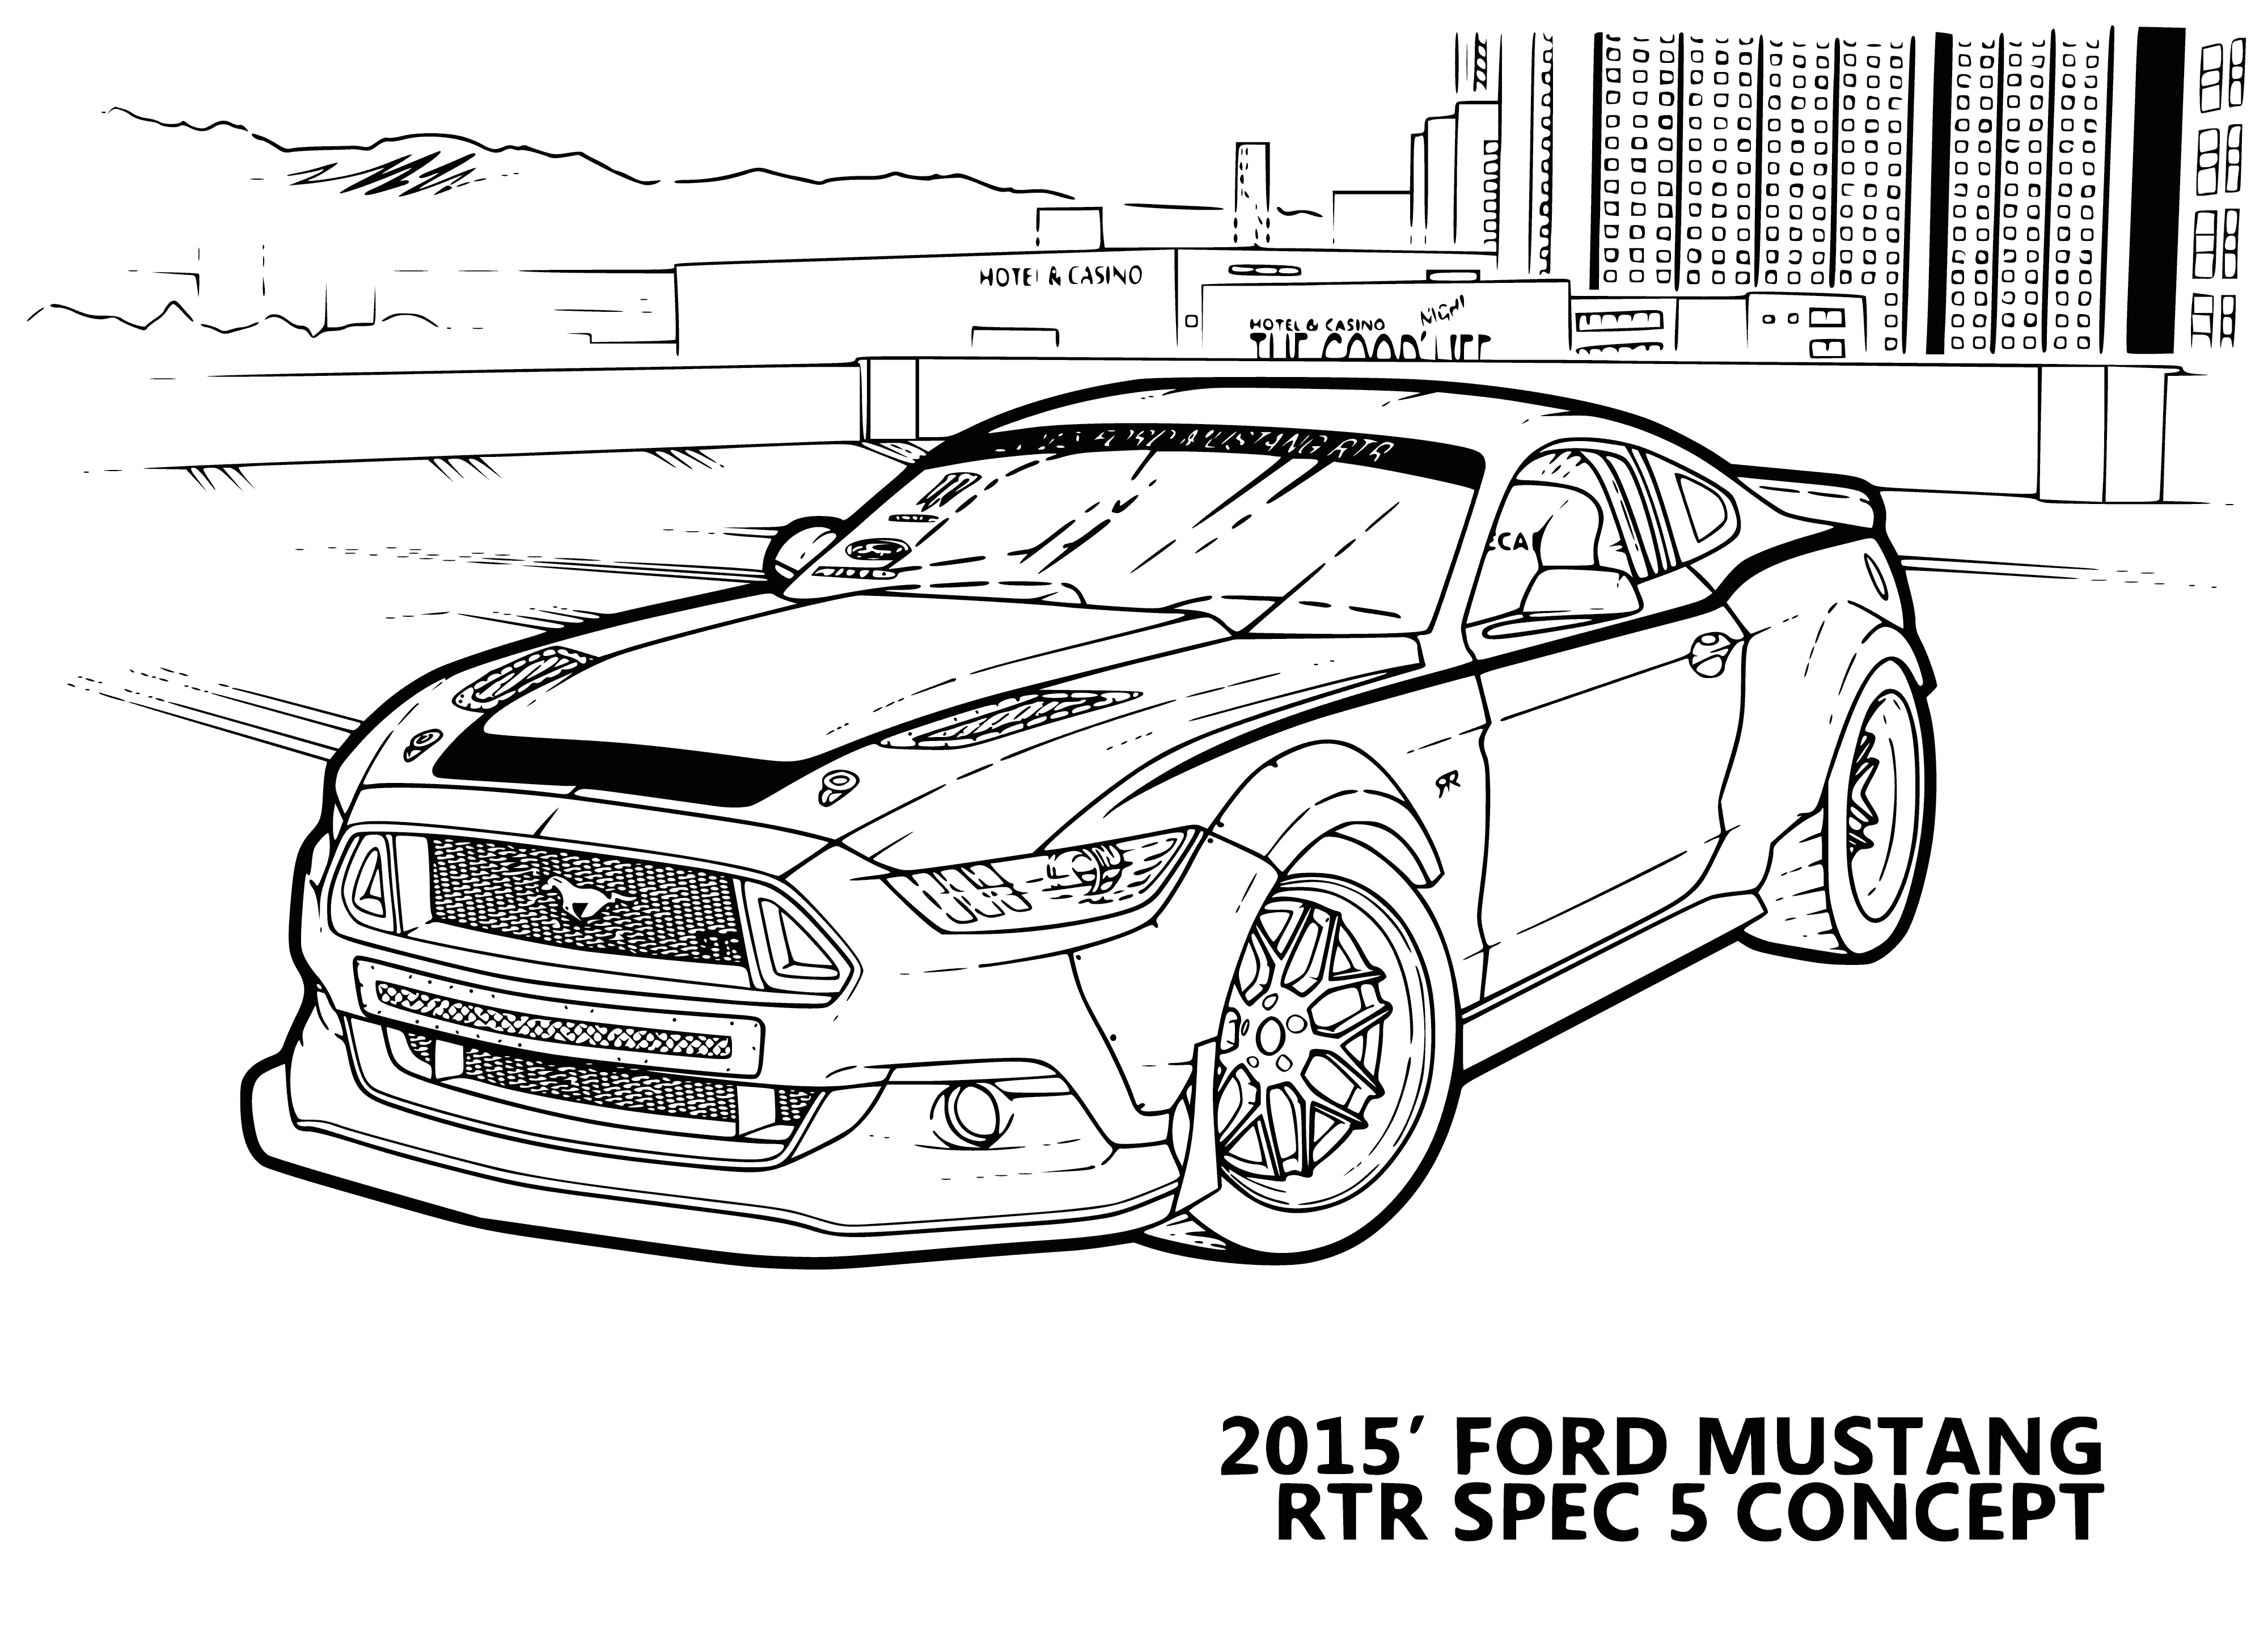 coloring page: Sleek, low car with long hood and short trunk; silver with black accents on hood, windows and wheels.